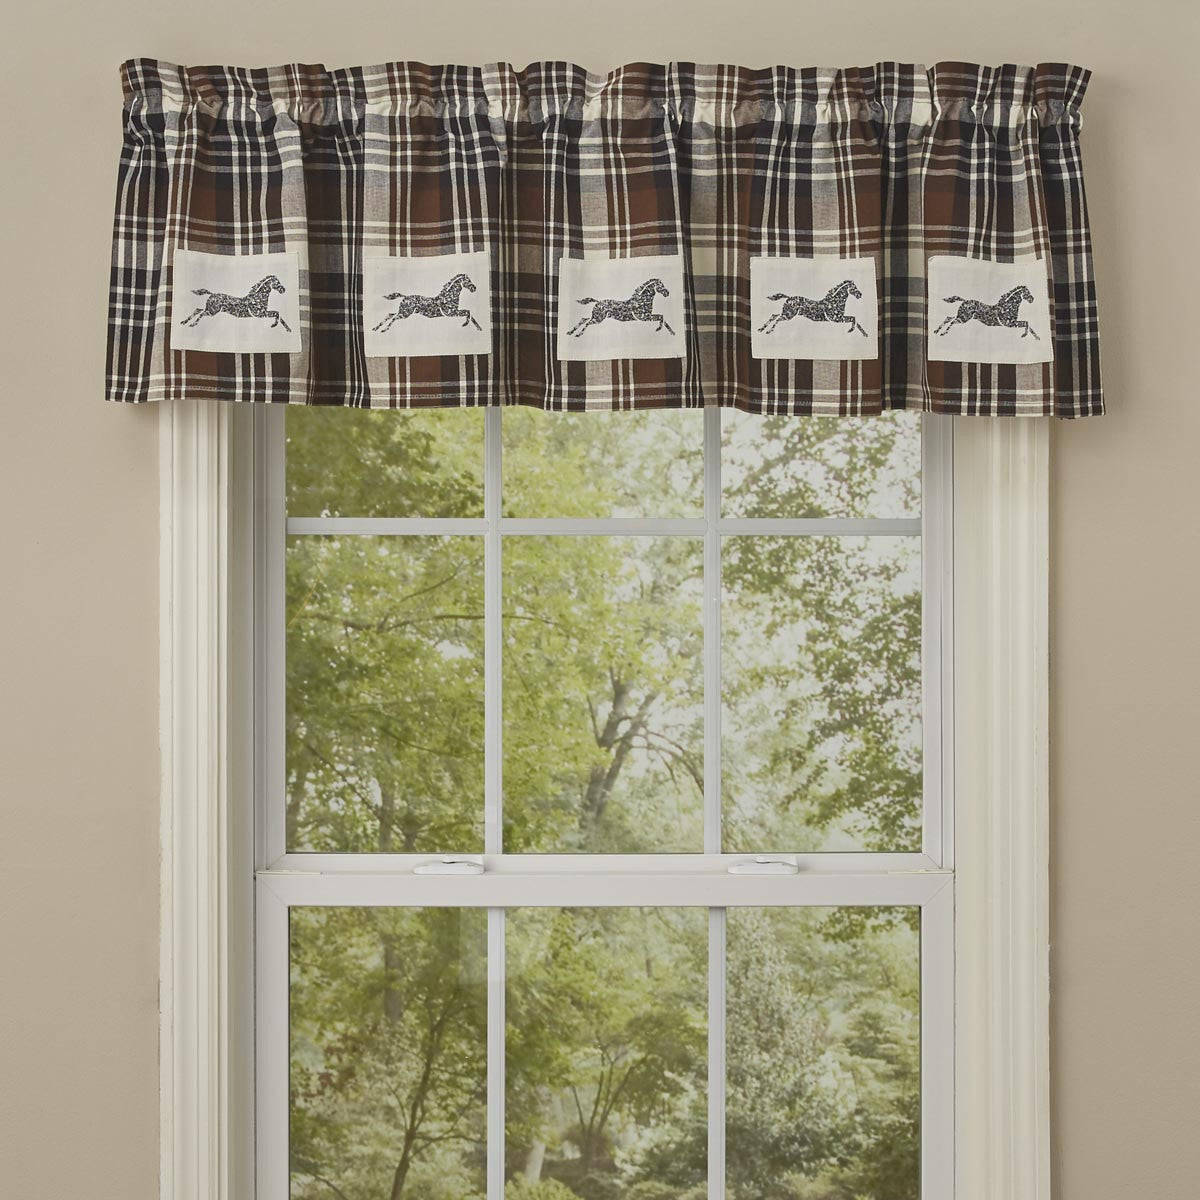 Park Design Derby Horse Lined Patch Valance 60 x 14 Inches